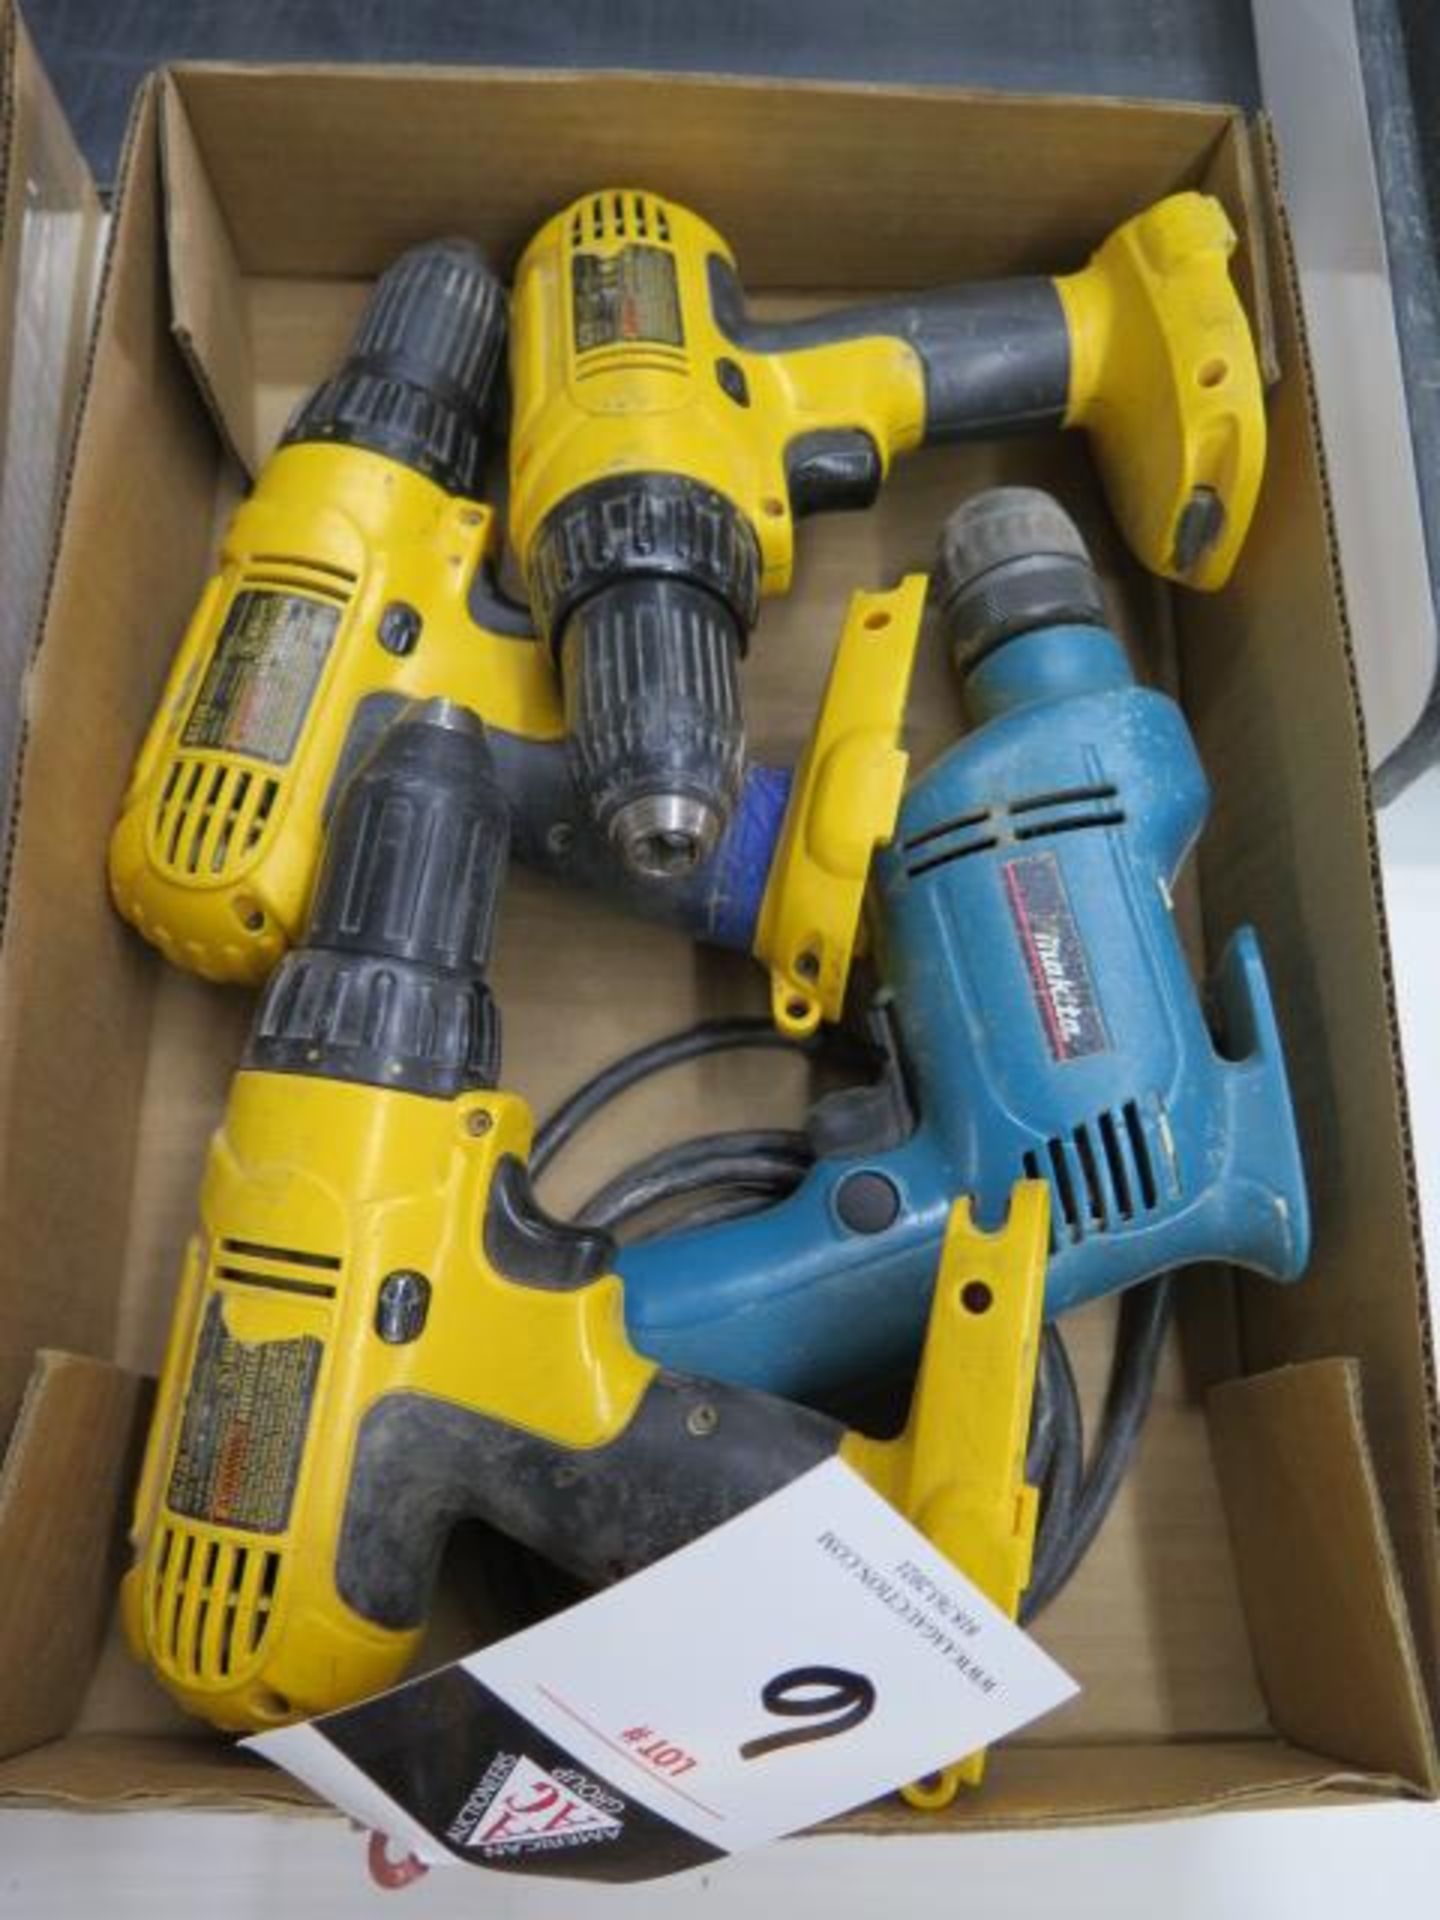 DeWalt 14.4Volt Cordless Drills (3) (NO CHARGER OR BARRERIES) and Makita Electric Drill (SOLD AS-